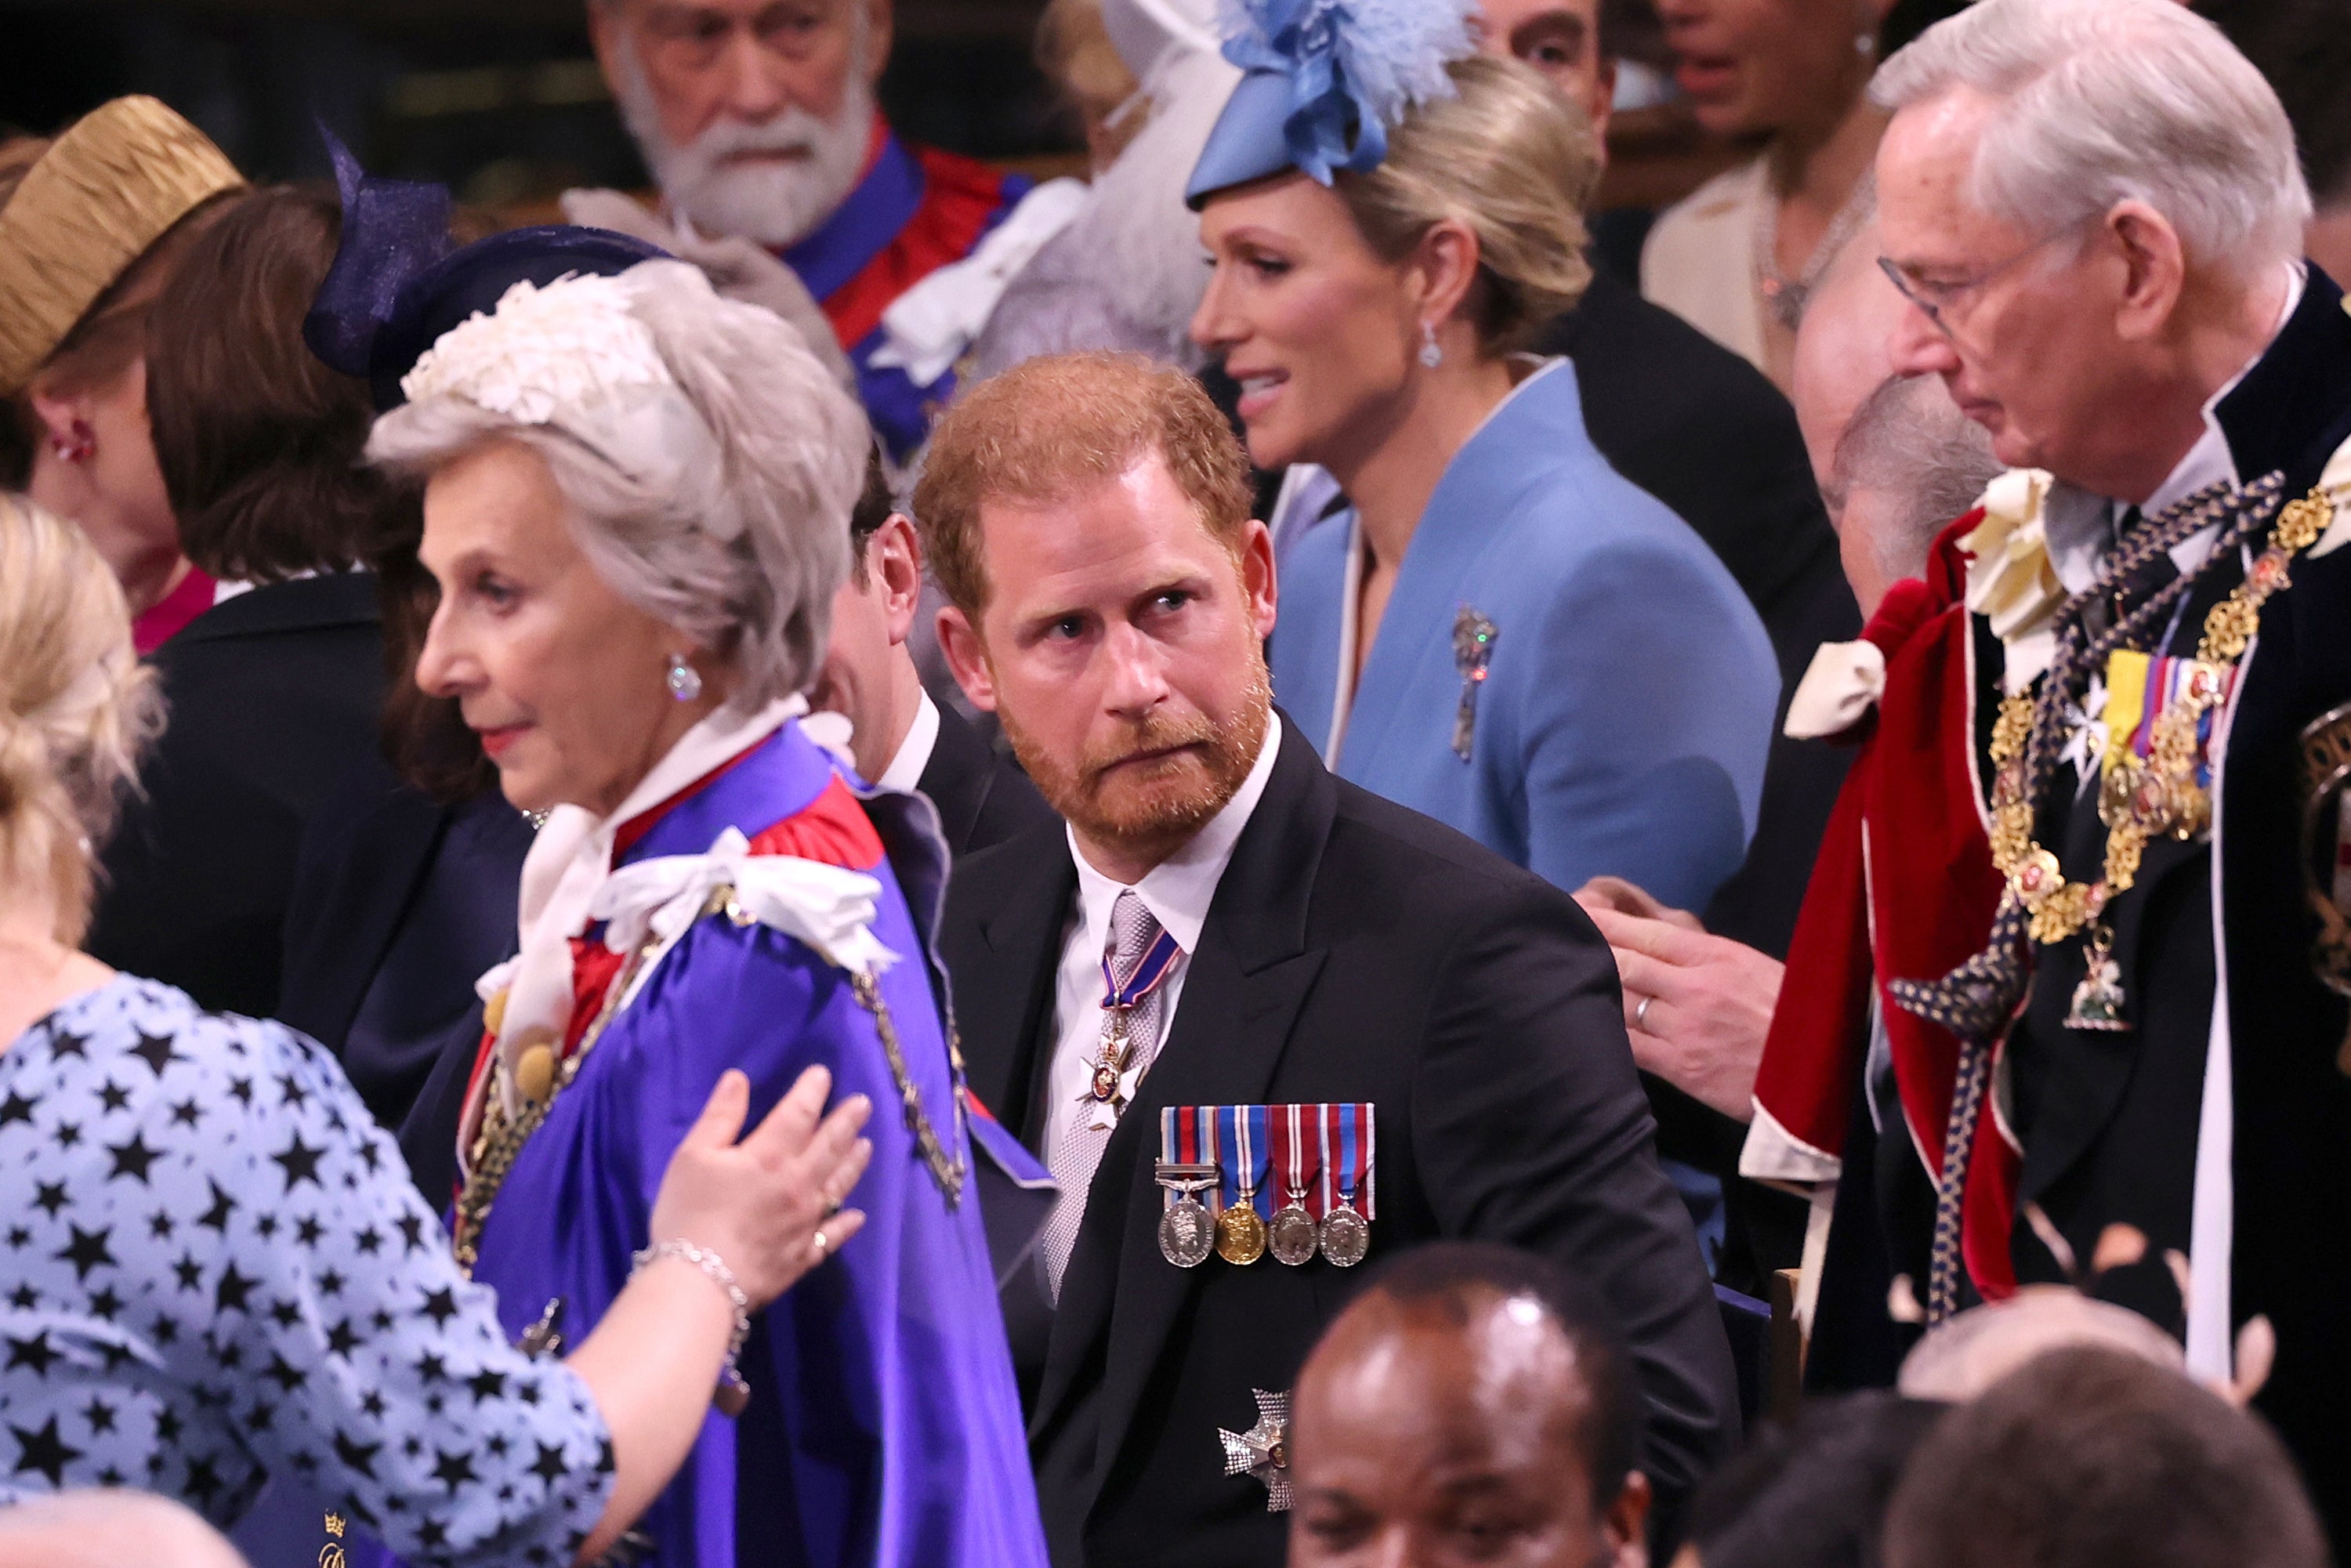 Prince Harry looked startled at one point during the coronation ceremony